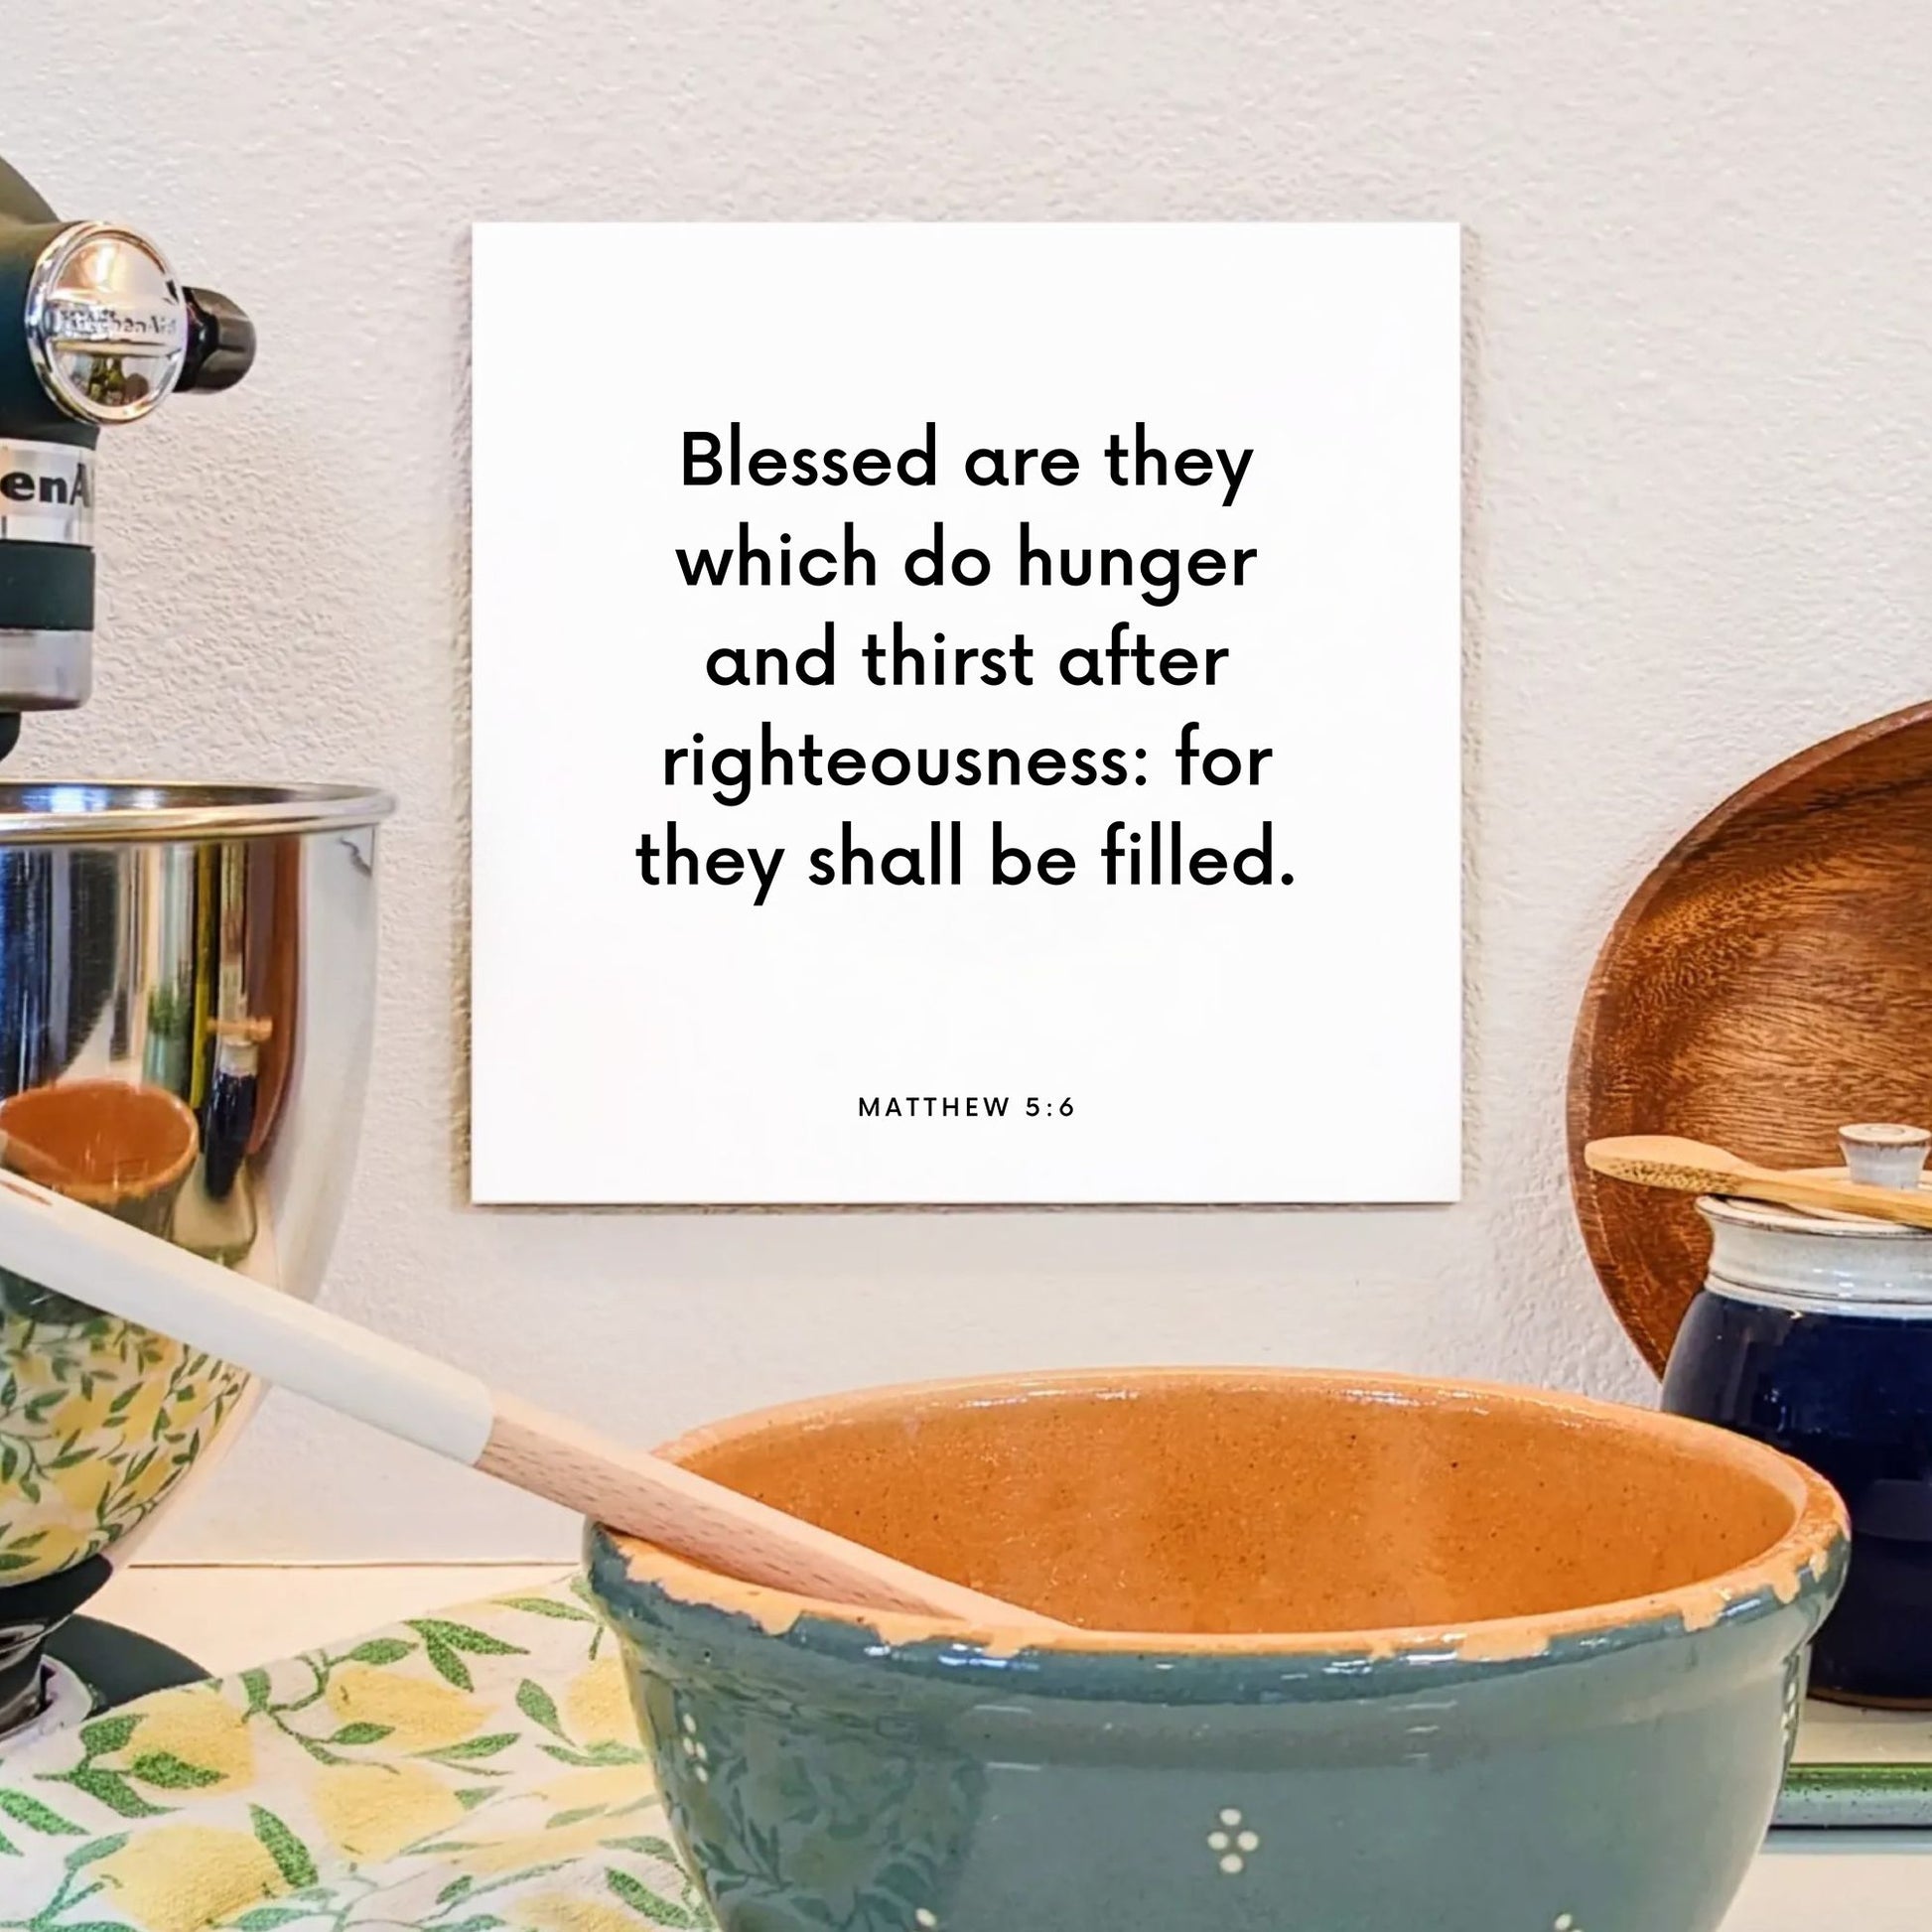 Kitchen mouting of the scripture tile for Matthew 5:6 - "Blessed are they which hunger and thirst after righteousness"